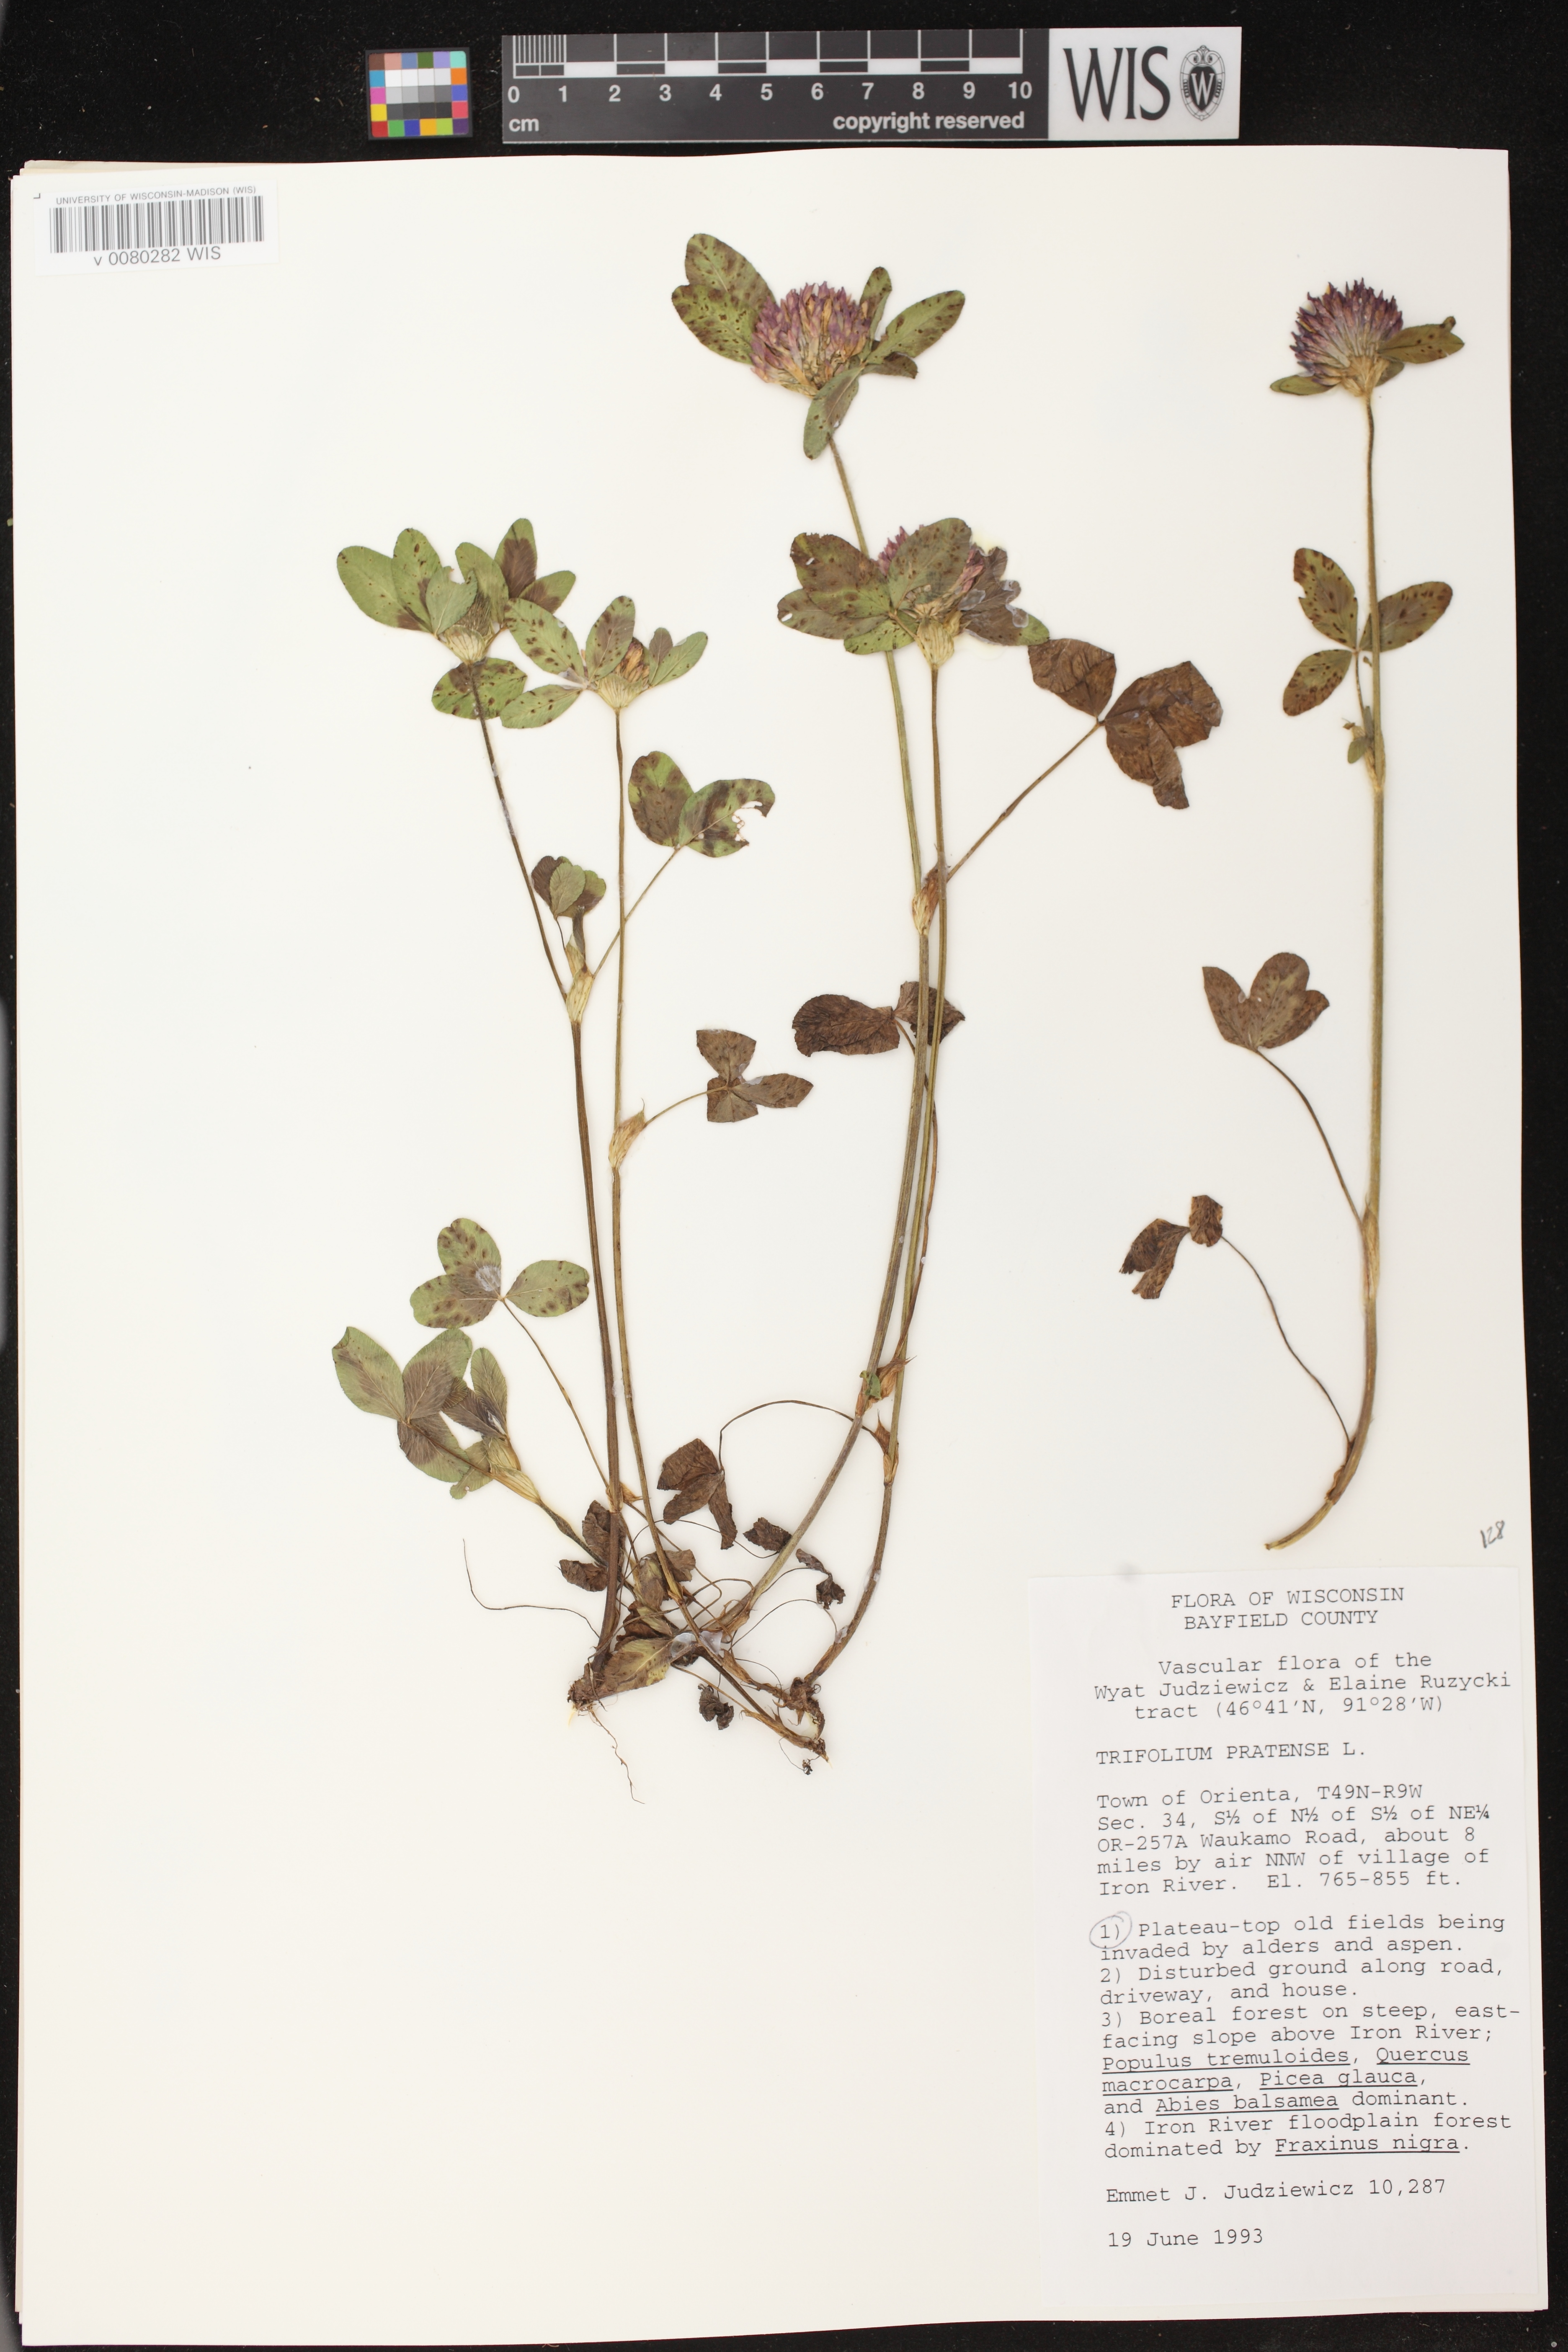 Online Virtual Flora of Wisconsin Detailed Collection Record Information